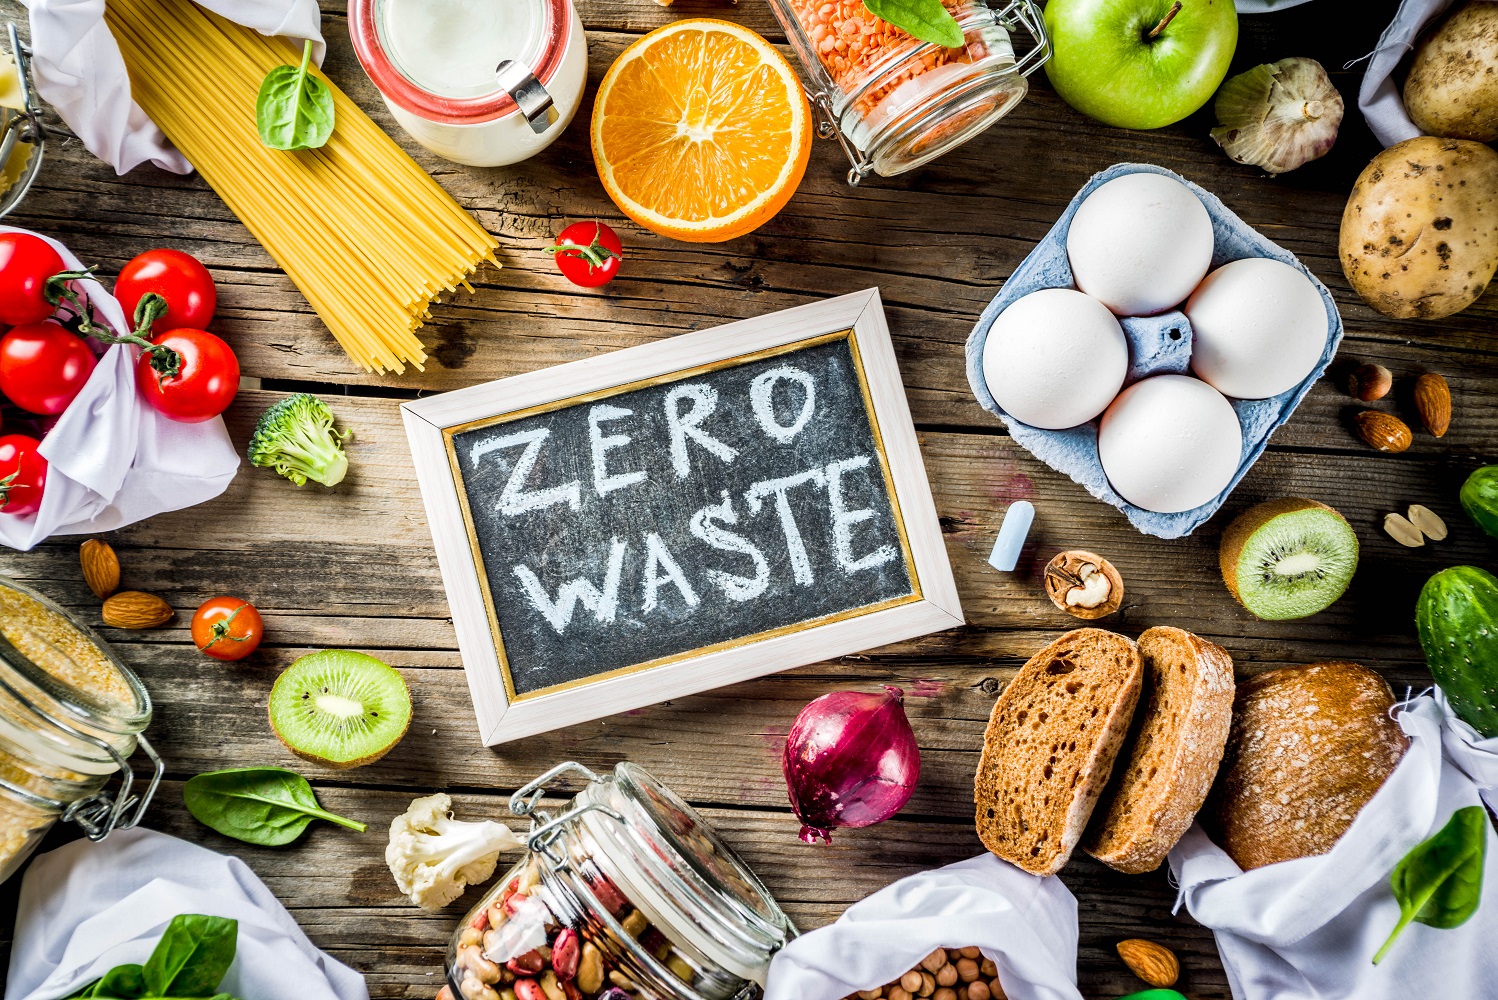 Ecobnb - 9 Simple Steps to Reduce Your Restaurant's Waste